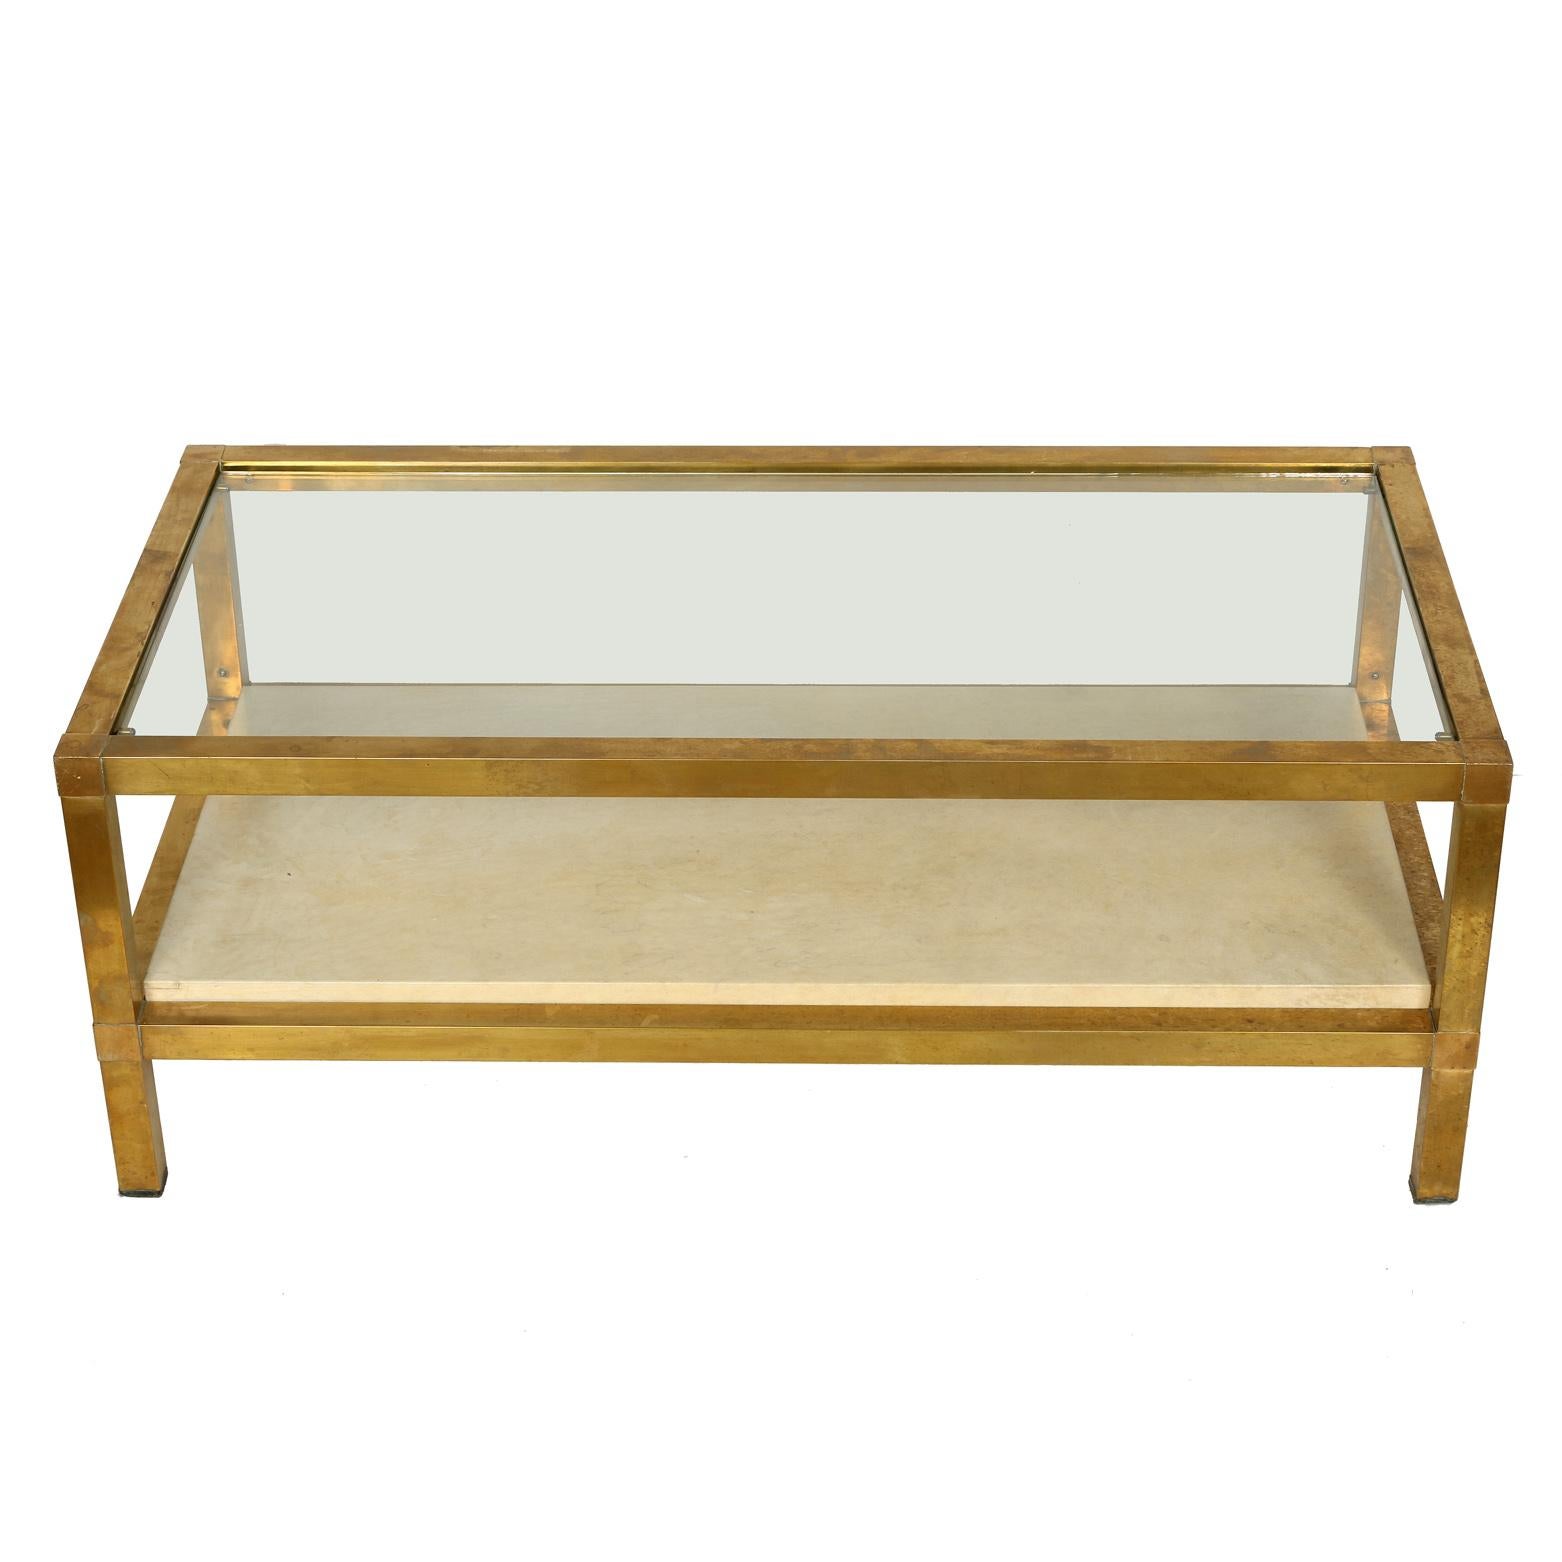 Mid-Century Modern rectangular brass coffee table with glass top and parchment shelf.